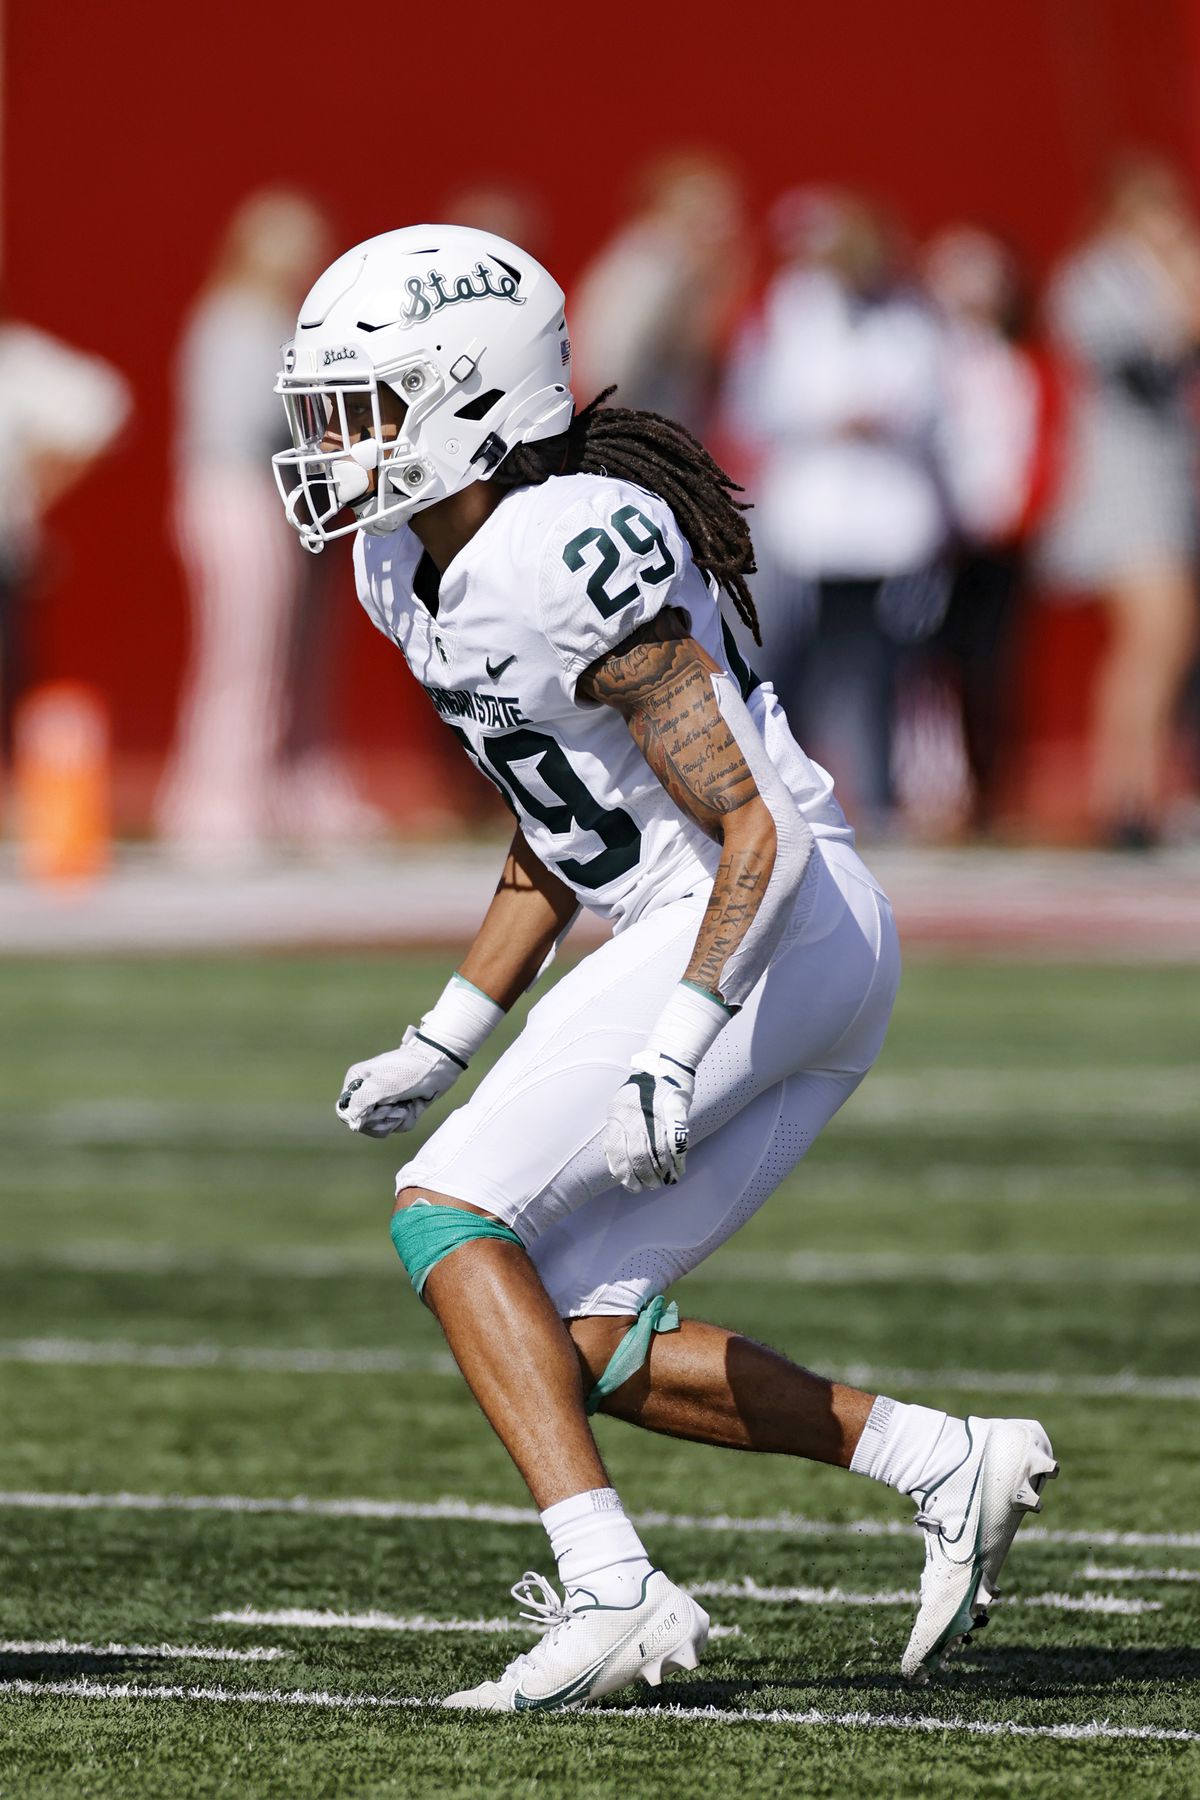 COLLEGE FOOTBALL: OCT 16 Michigan State at Indiana